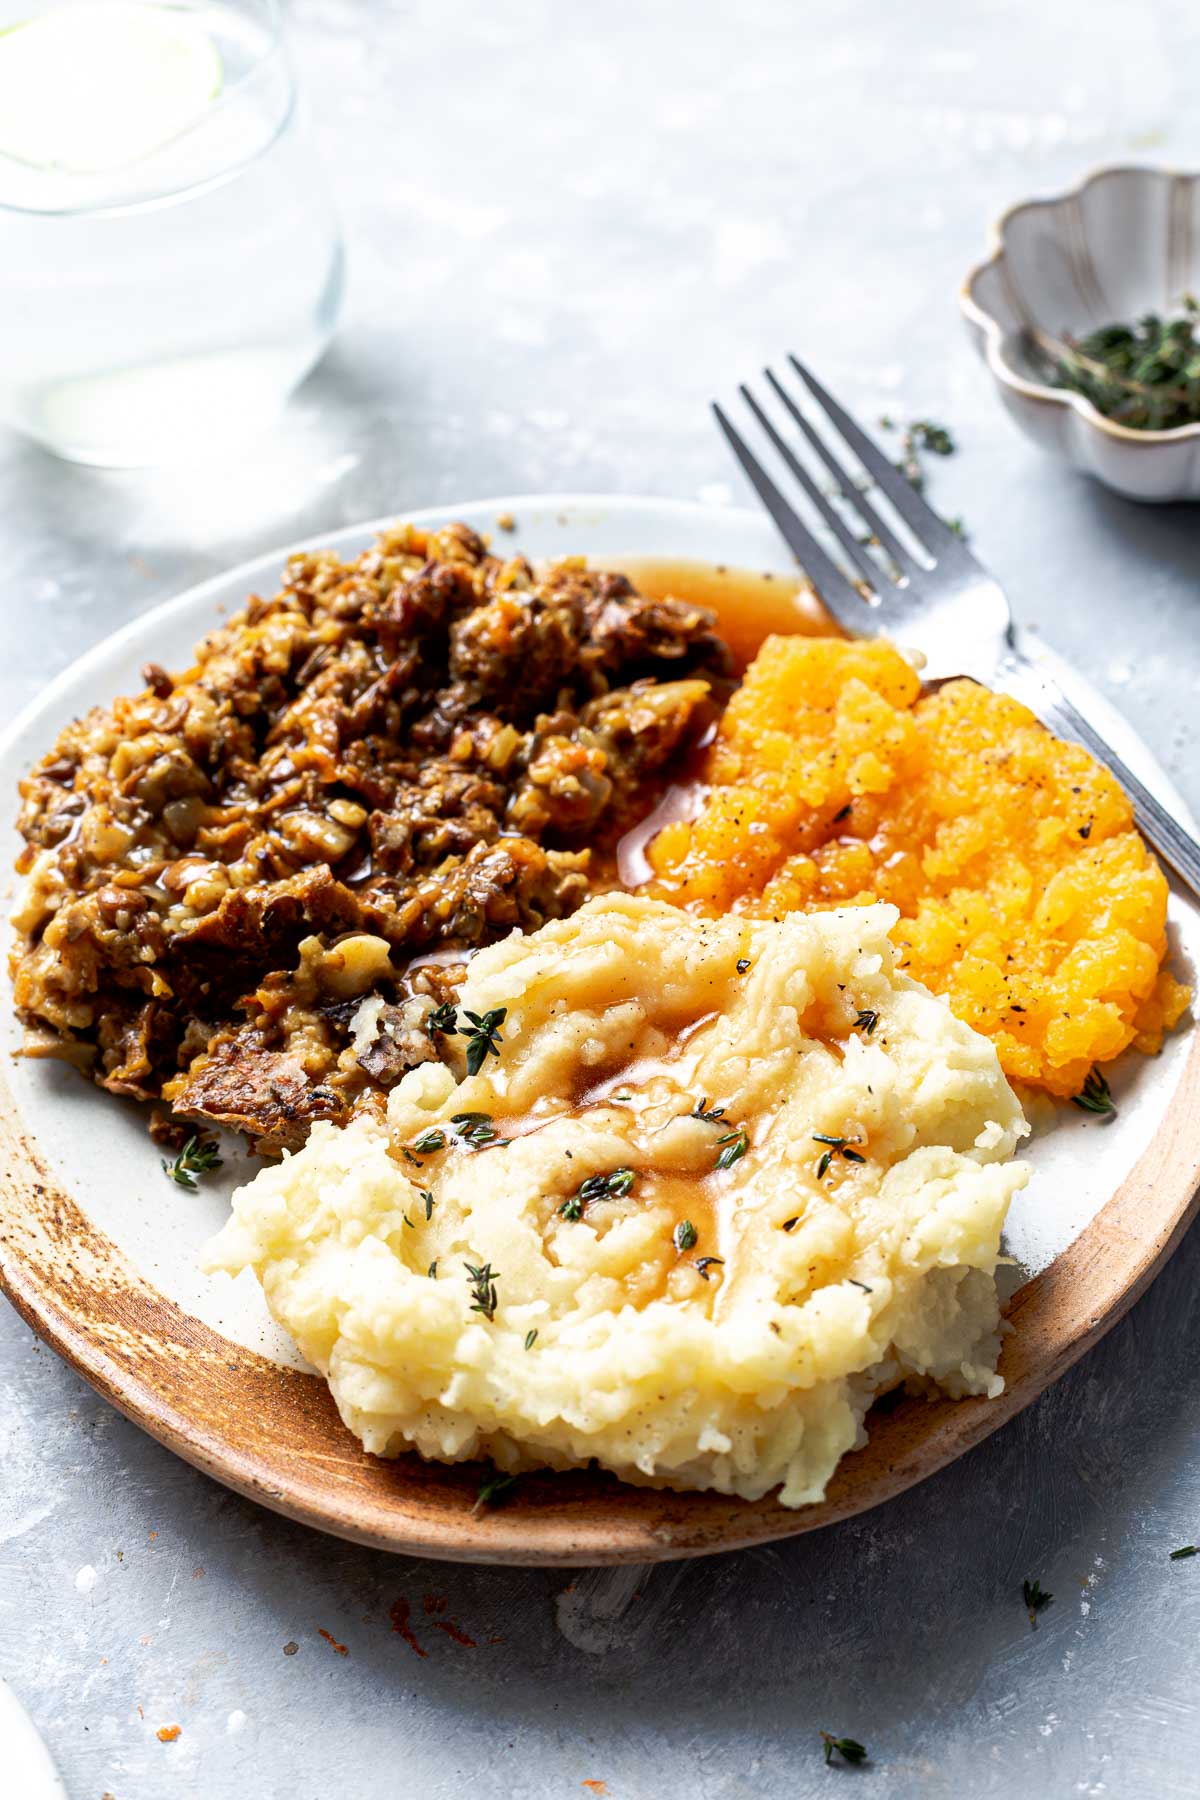 A side view of a plate of haggis with neeps and tatties.